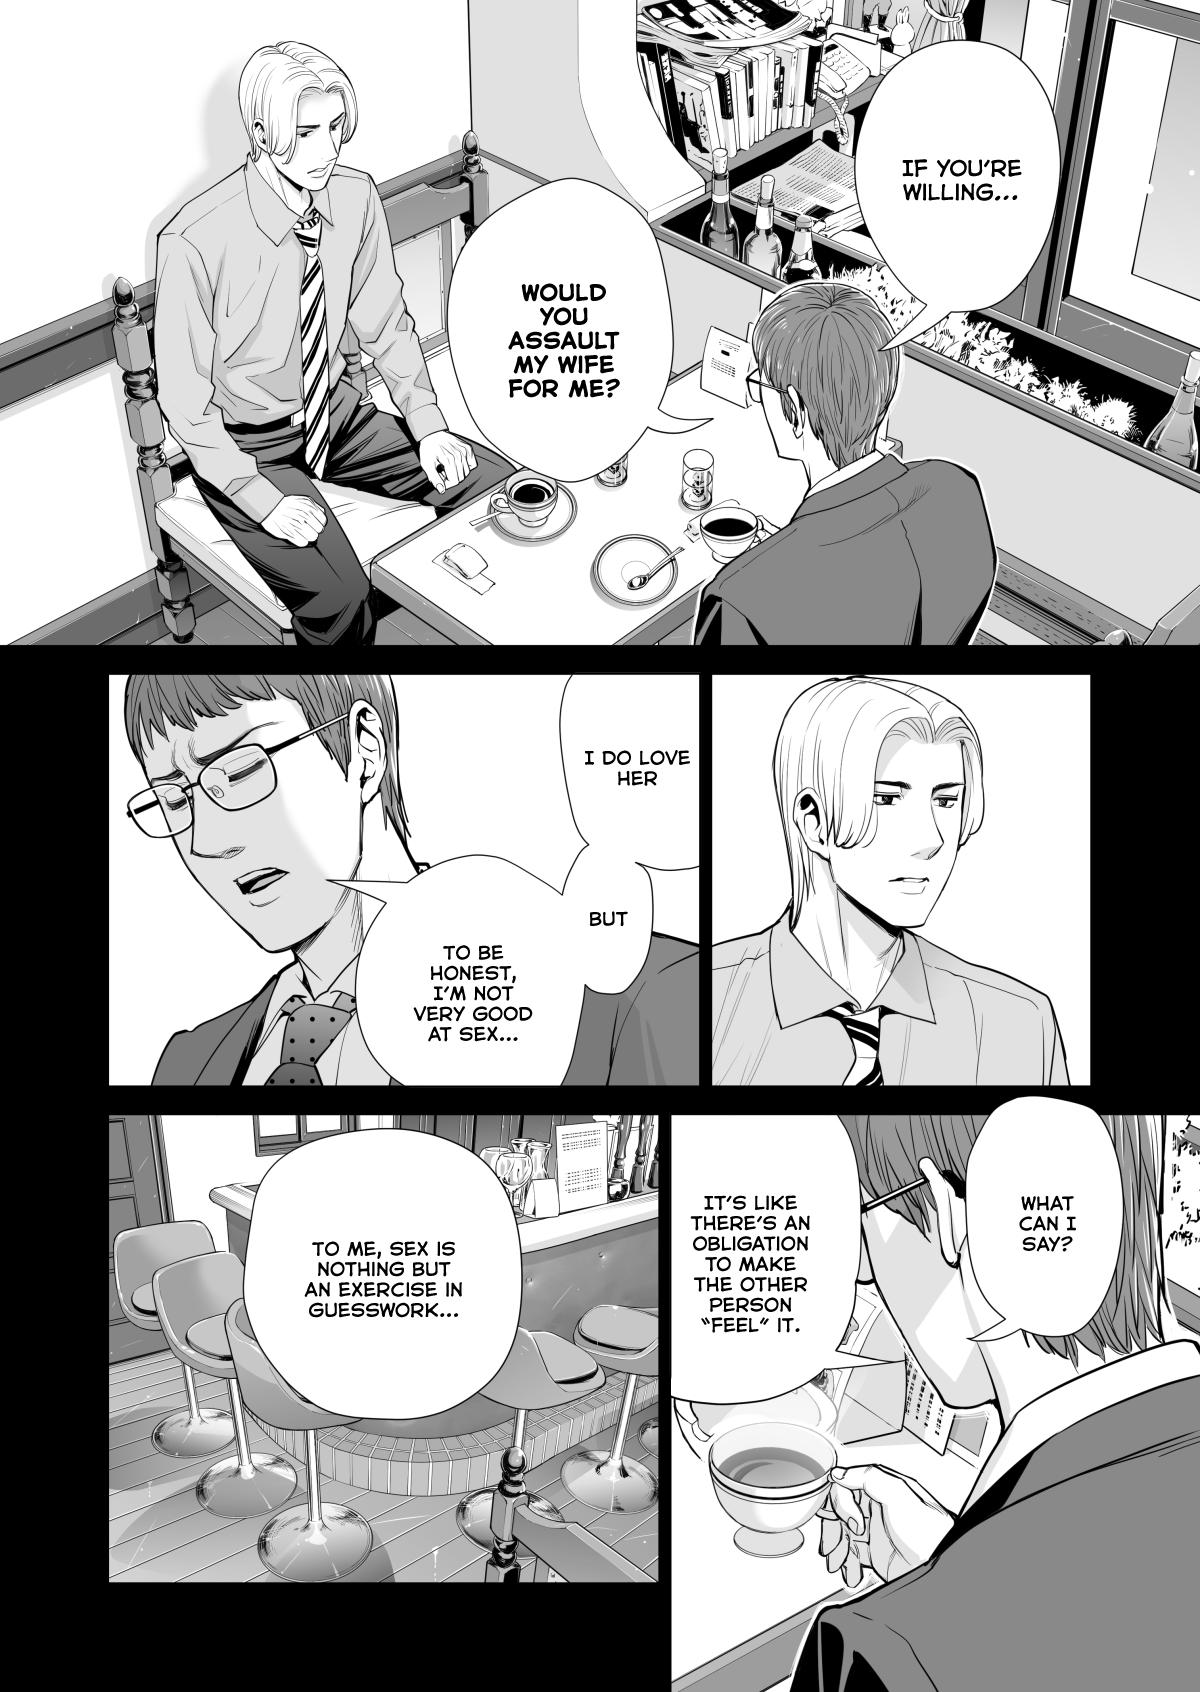 [HGT Lab (Tsusauto)] Tsukiyo no Midare Zake (Kouhen) Moonlit Intoxication ~ A Housewife Stolen by a Coworker Besides her Blackout Drunk Husband ~ Chapter 2 [English] 45